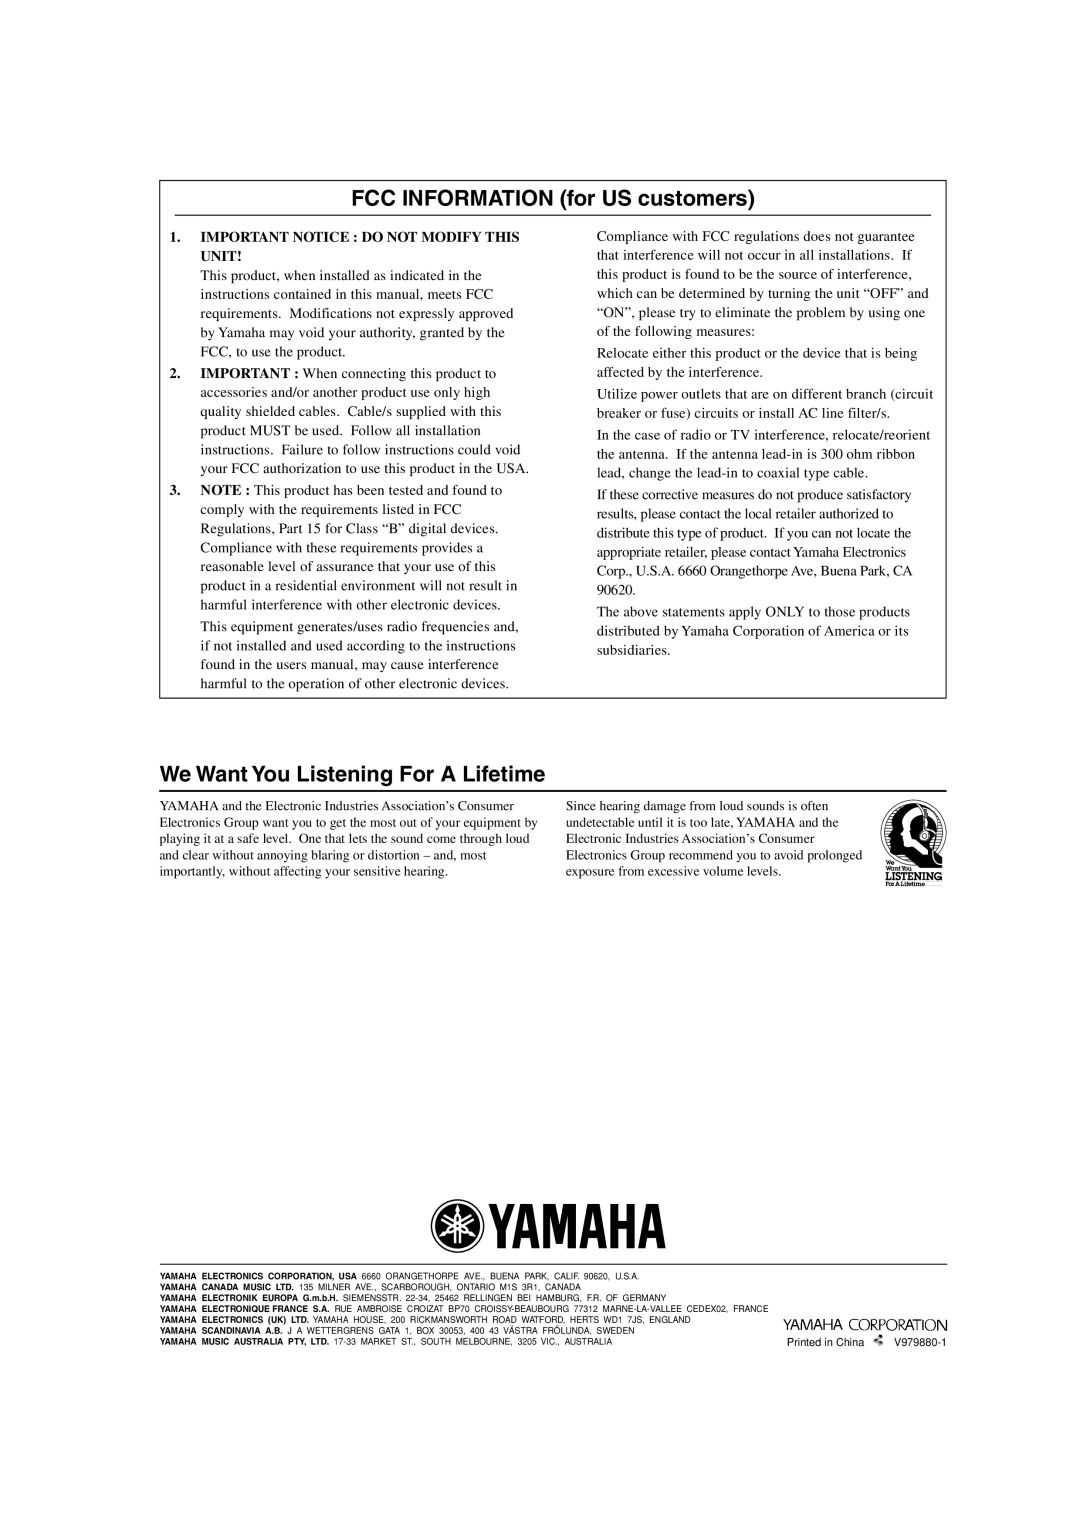 Yamaha TSS-10 owner manual FCC INFORMATION for US customers, We Want You Listening For A Lifetime 